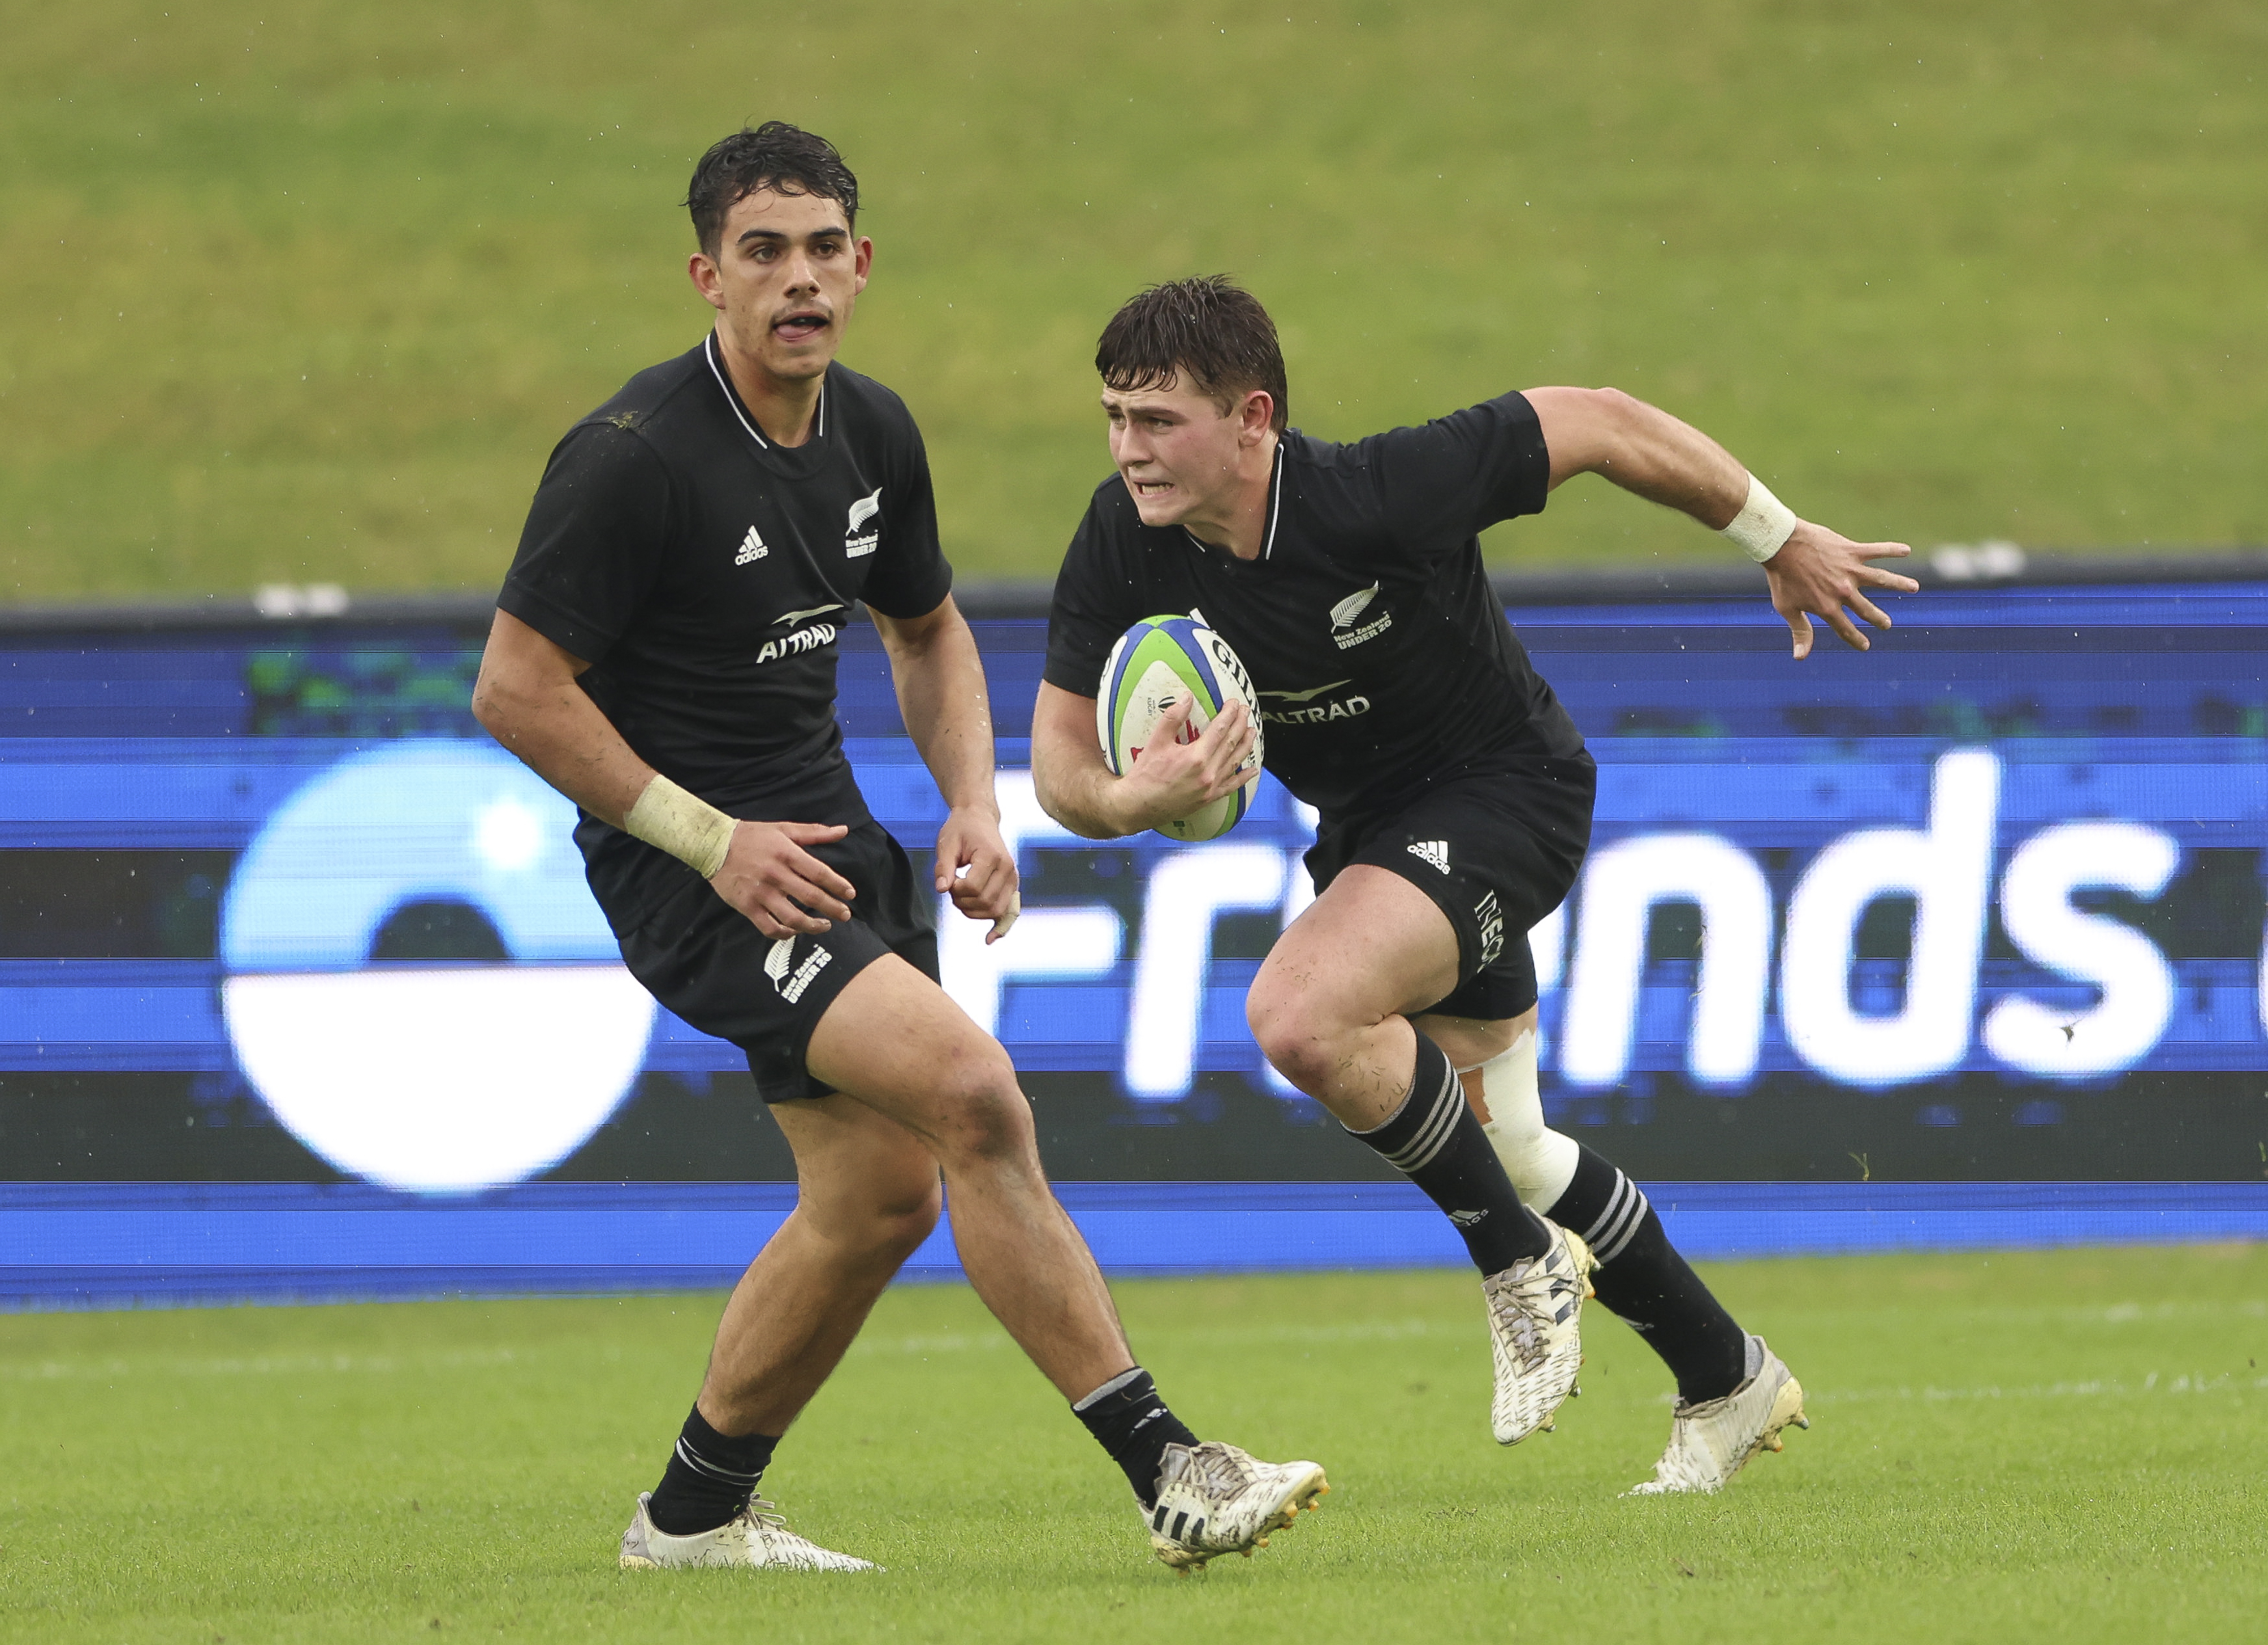 Silverware on the line for New Zealand  Under 20s